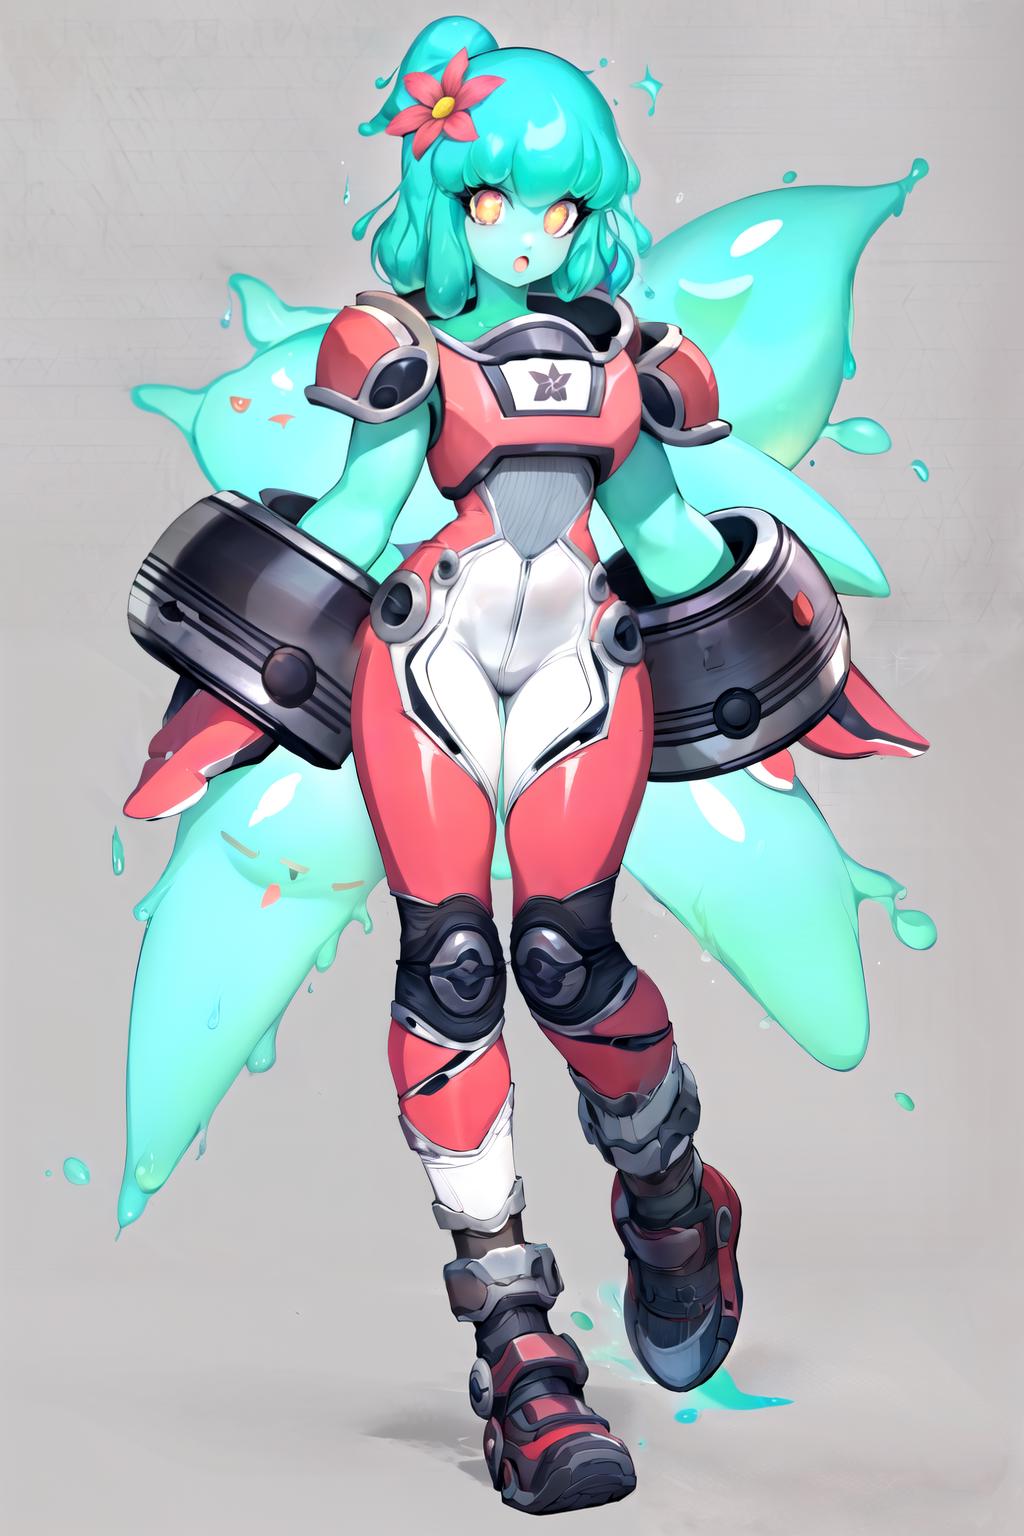 Juno / Slime girl - Omega Strikers image by wartificialai765